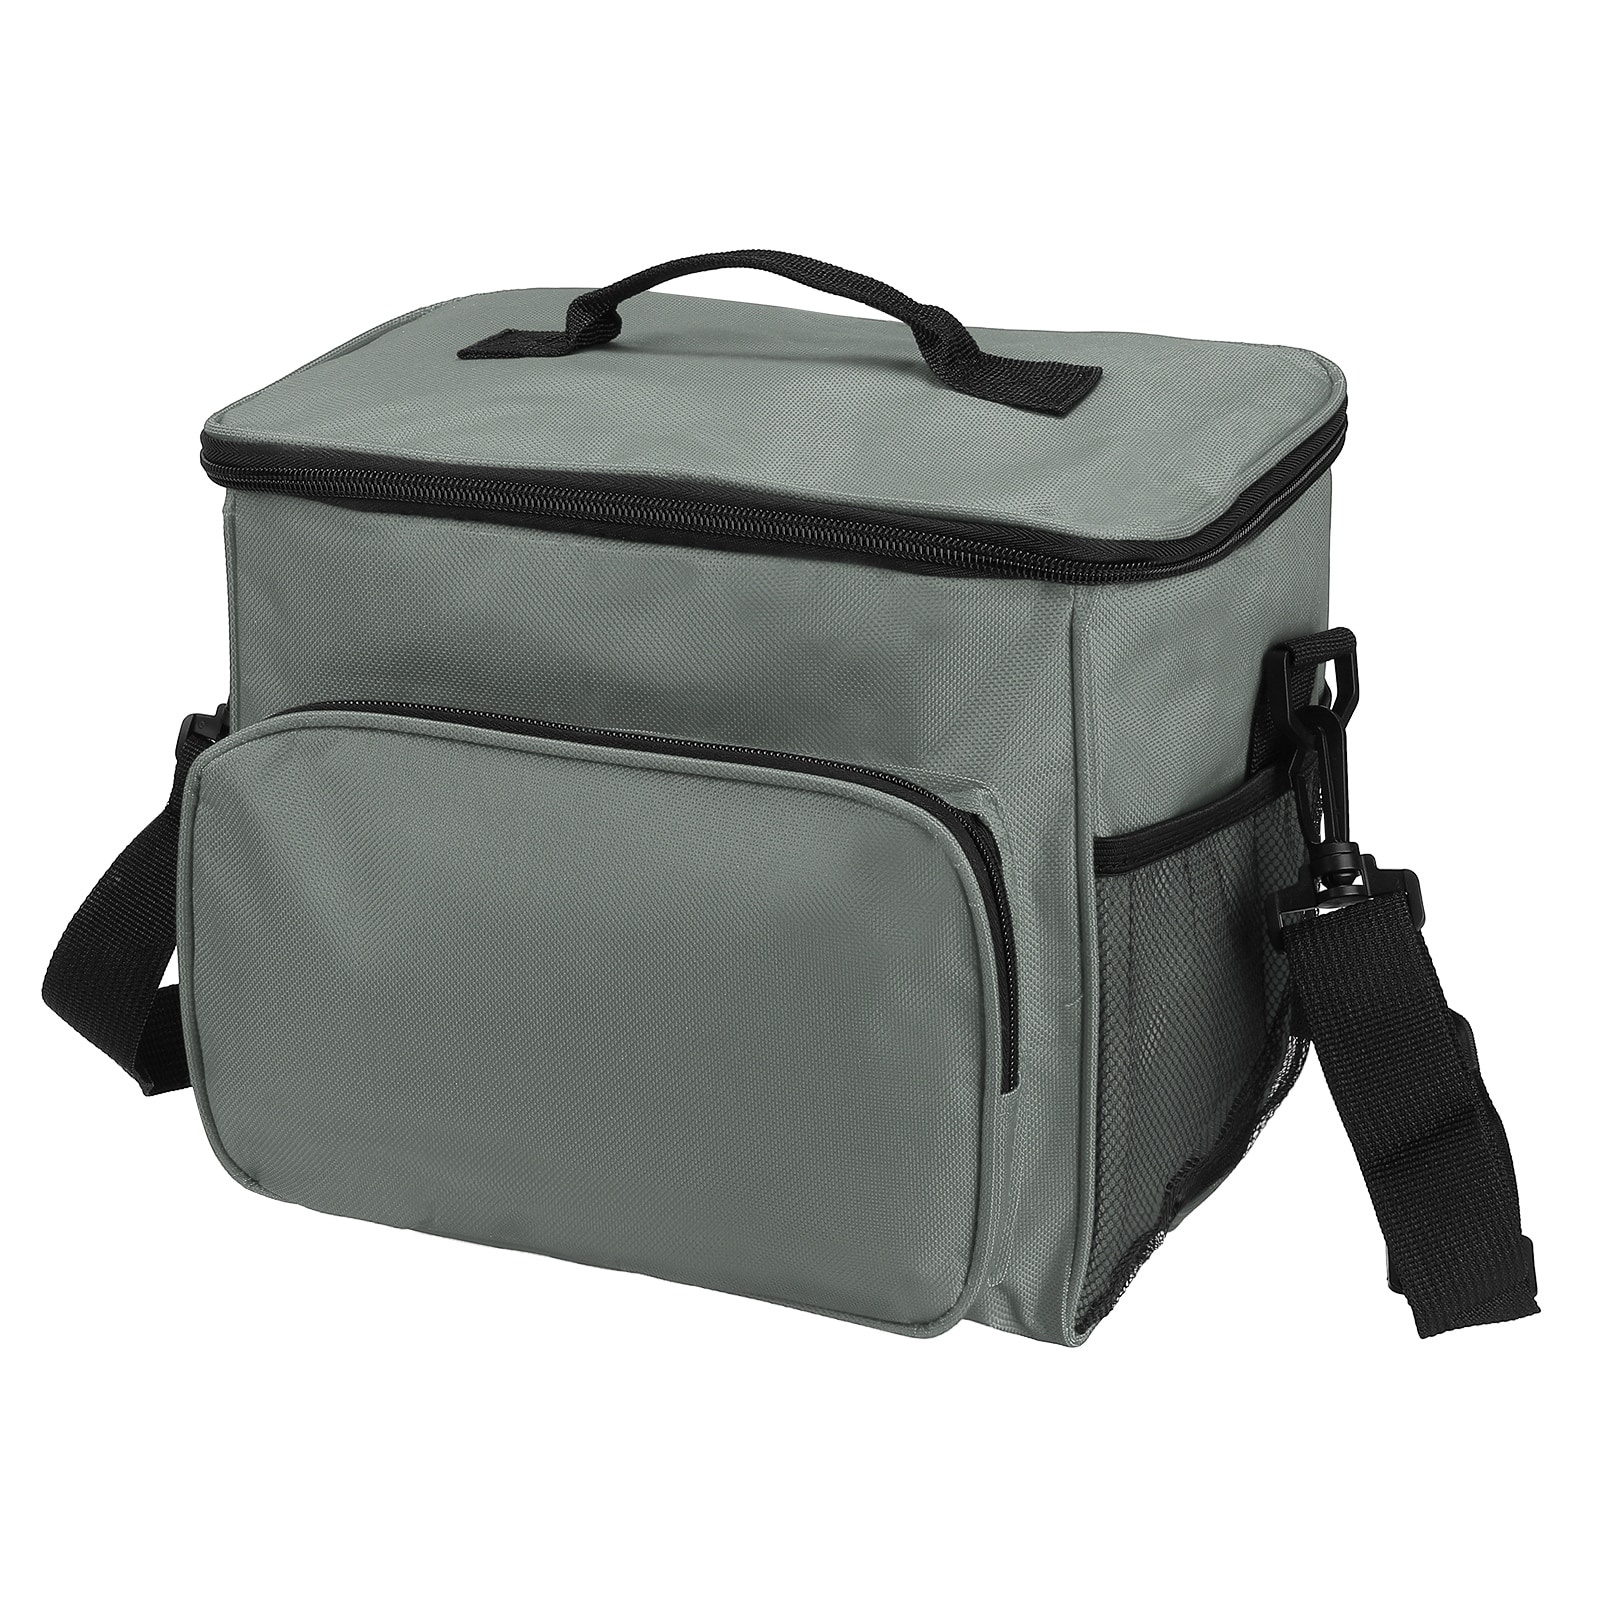 Lunch Box for Women/Men, Insulated Cooler Lunch Bag, 9.4x6.7x10.2 Inch